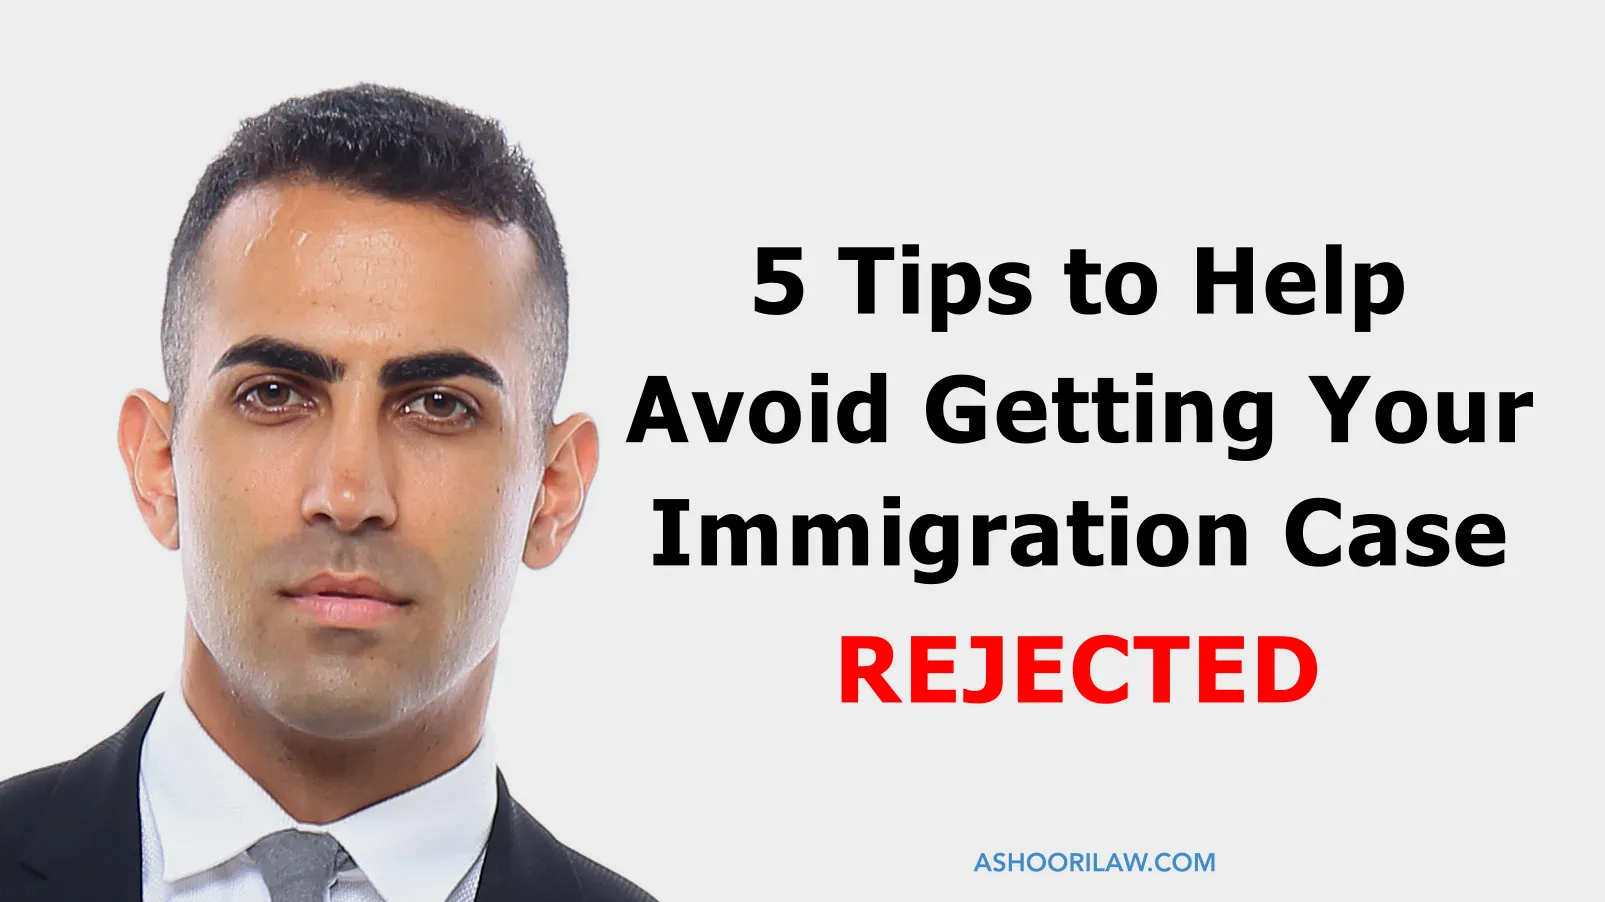 5 Tips to Help Avoid Getting Your Immigration Case REJECTED